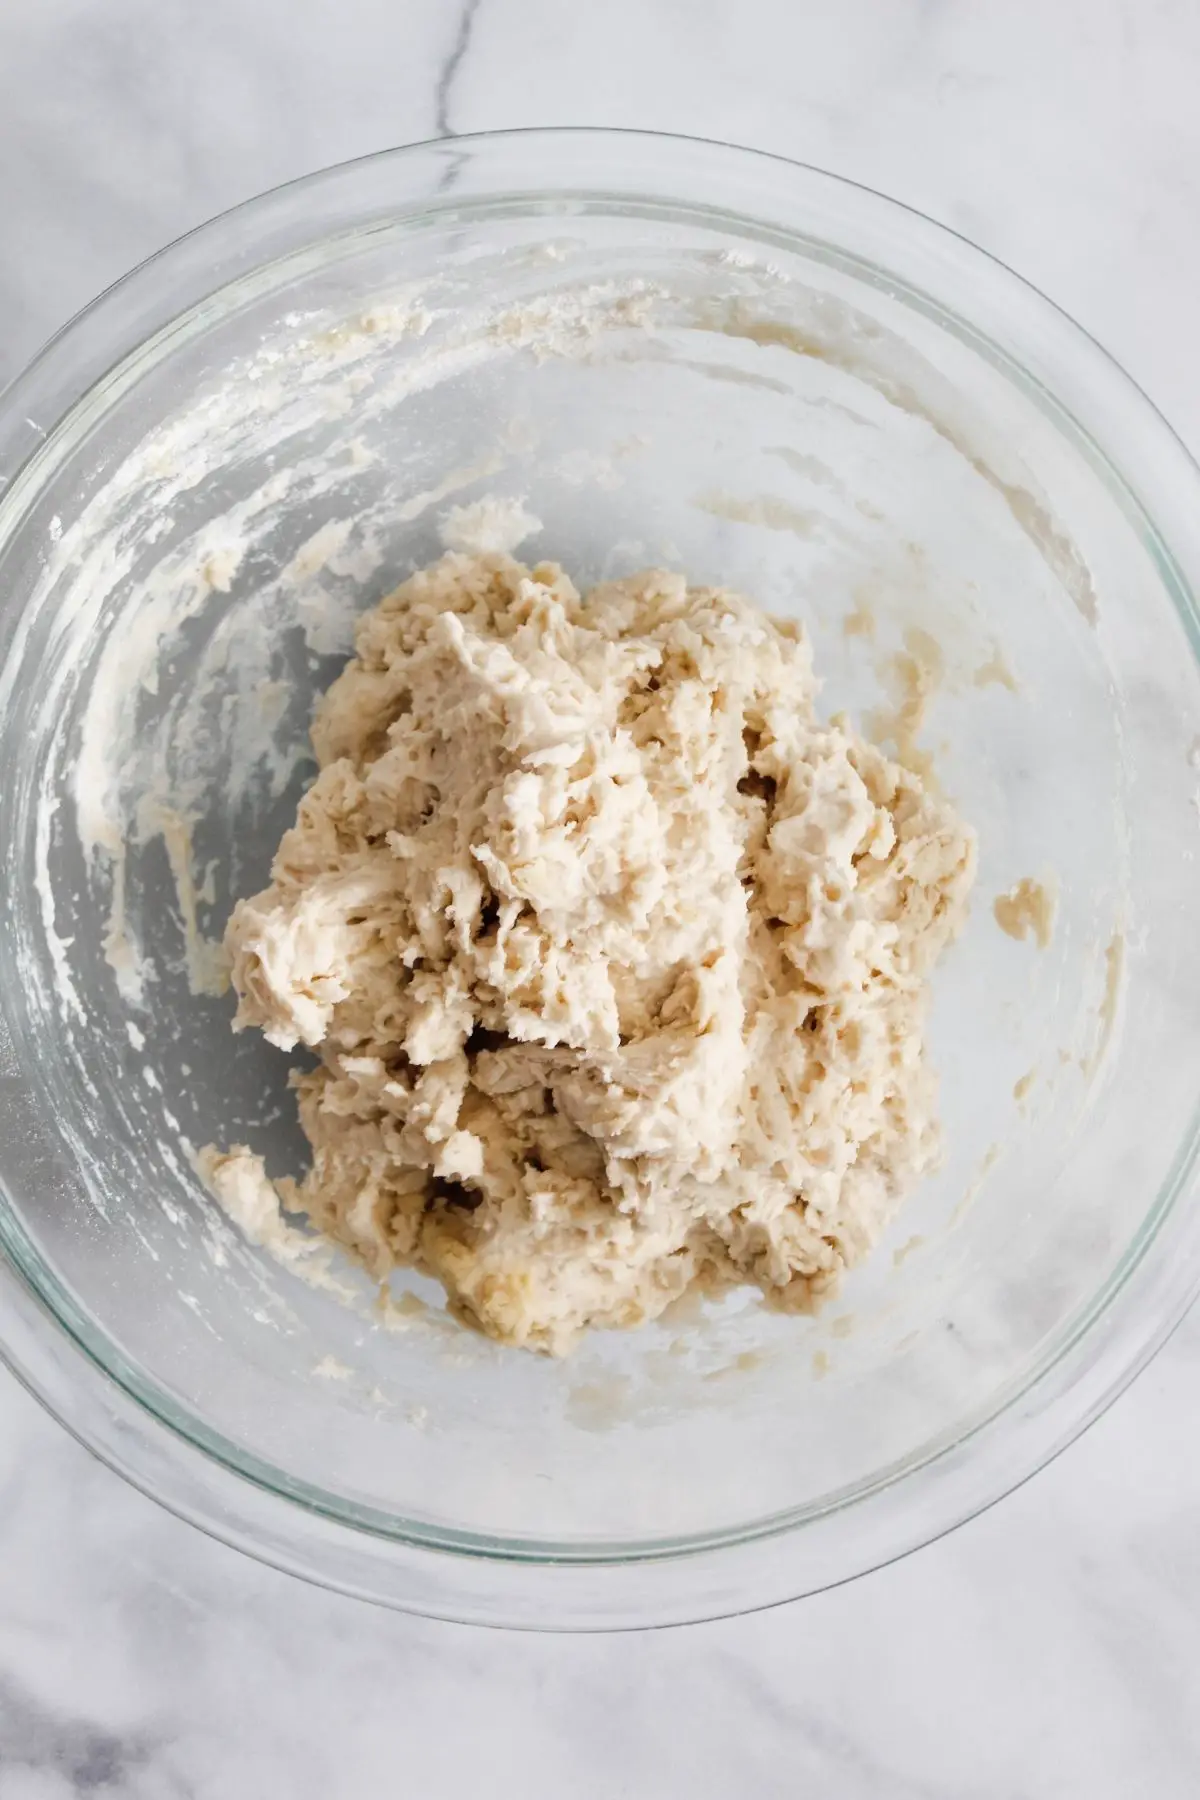 Add flour, salt, and olive oil to your yeast mixture